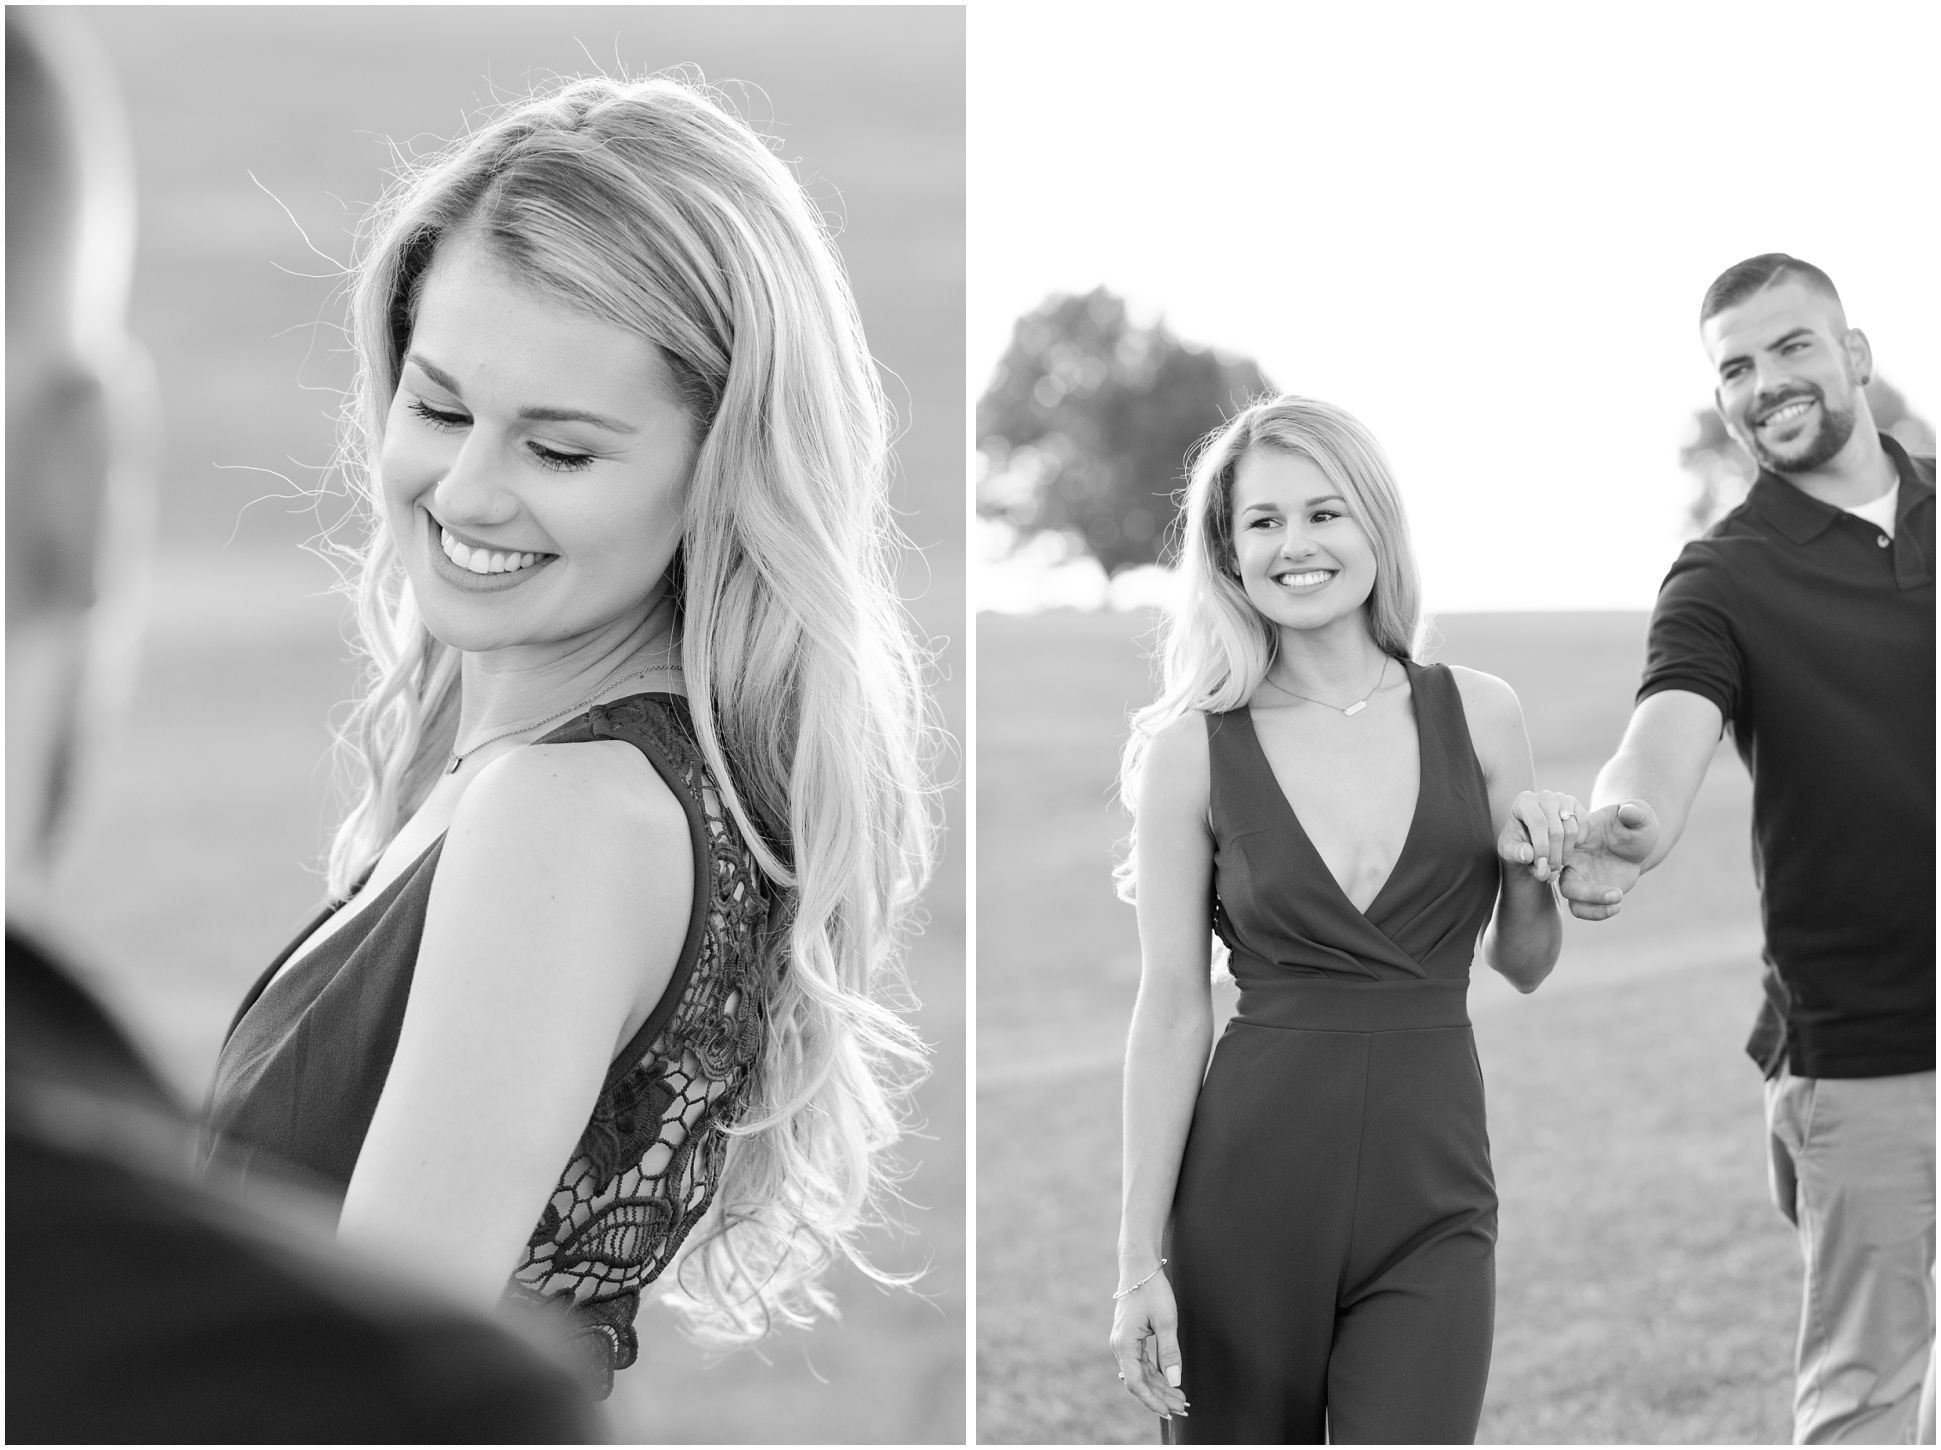 Two black and white photographs of Landry R. during her engagement session